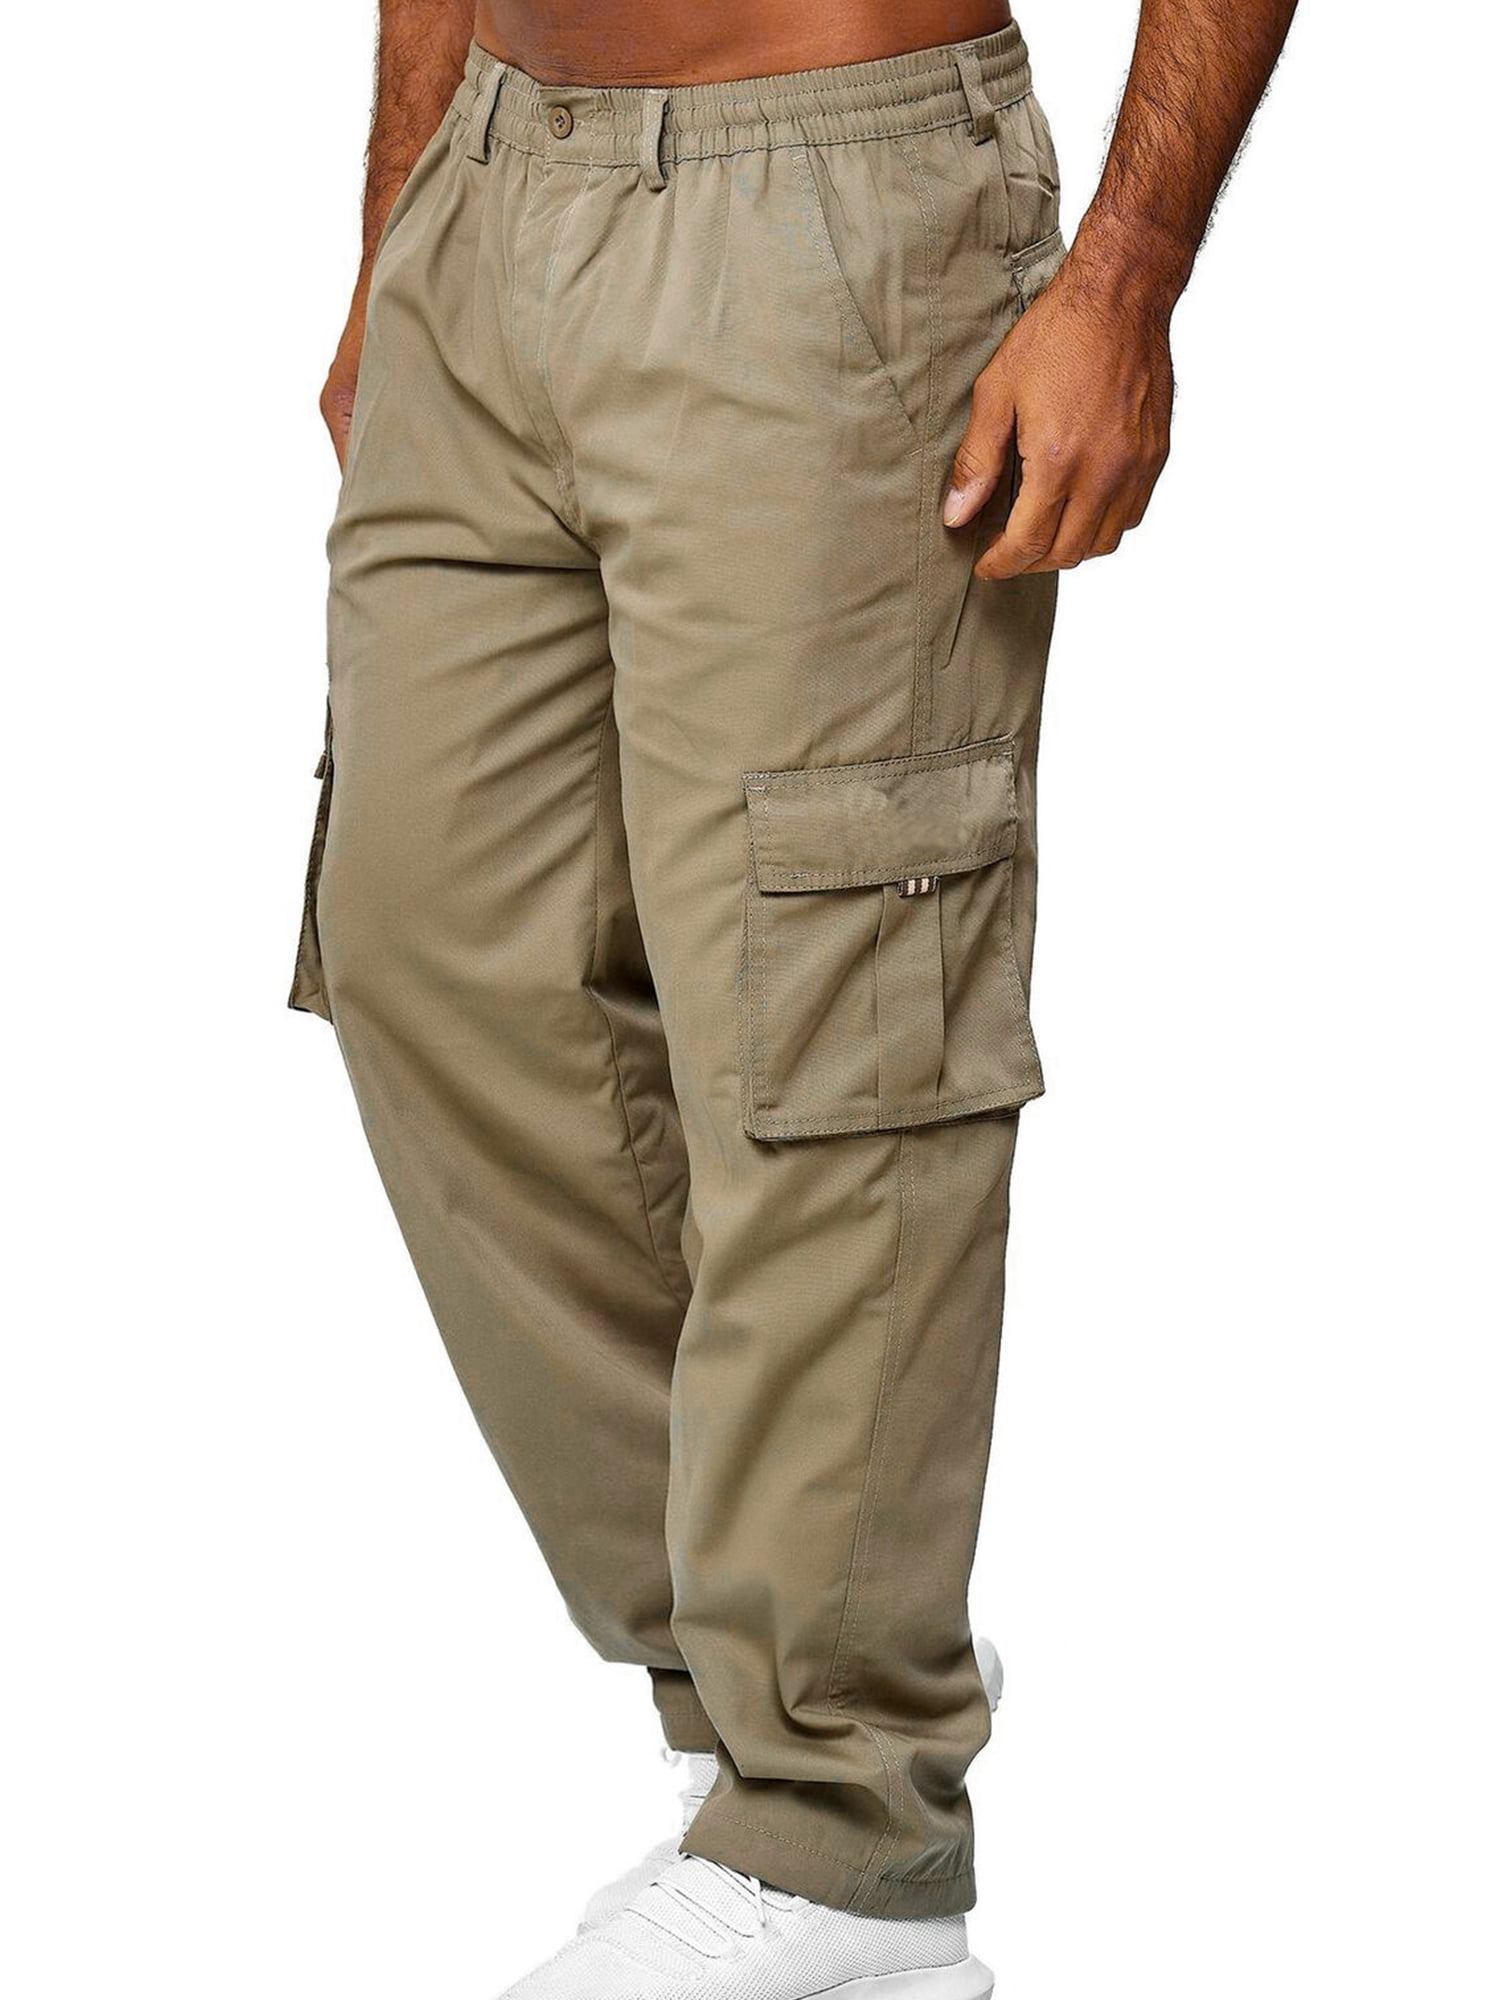 High Street Mens Straight Cargo Pants Mens With Multi Pockets, Elastic Waist,  And Solid Color Perfect For Casual Wear, Hip Hop, Or Baggy Style From  Dongguan_ss, $42.14 | DHgate.Com